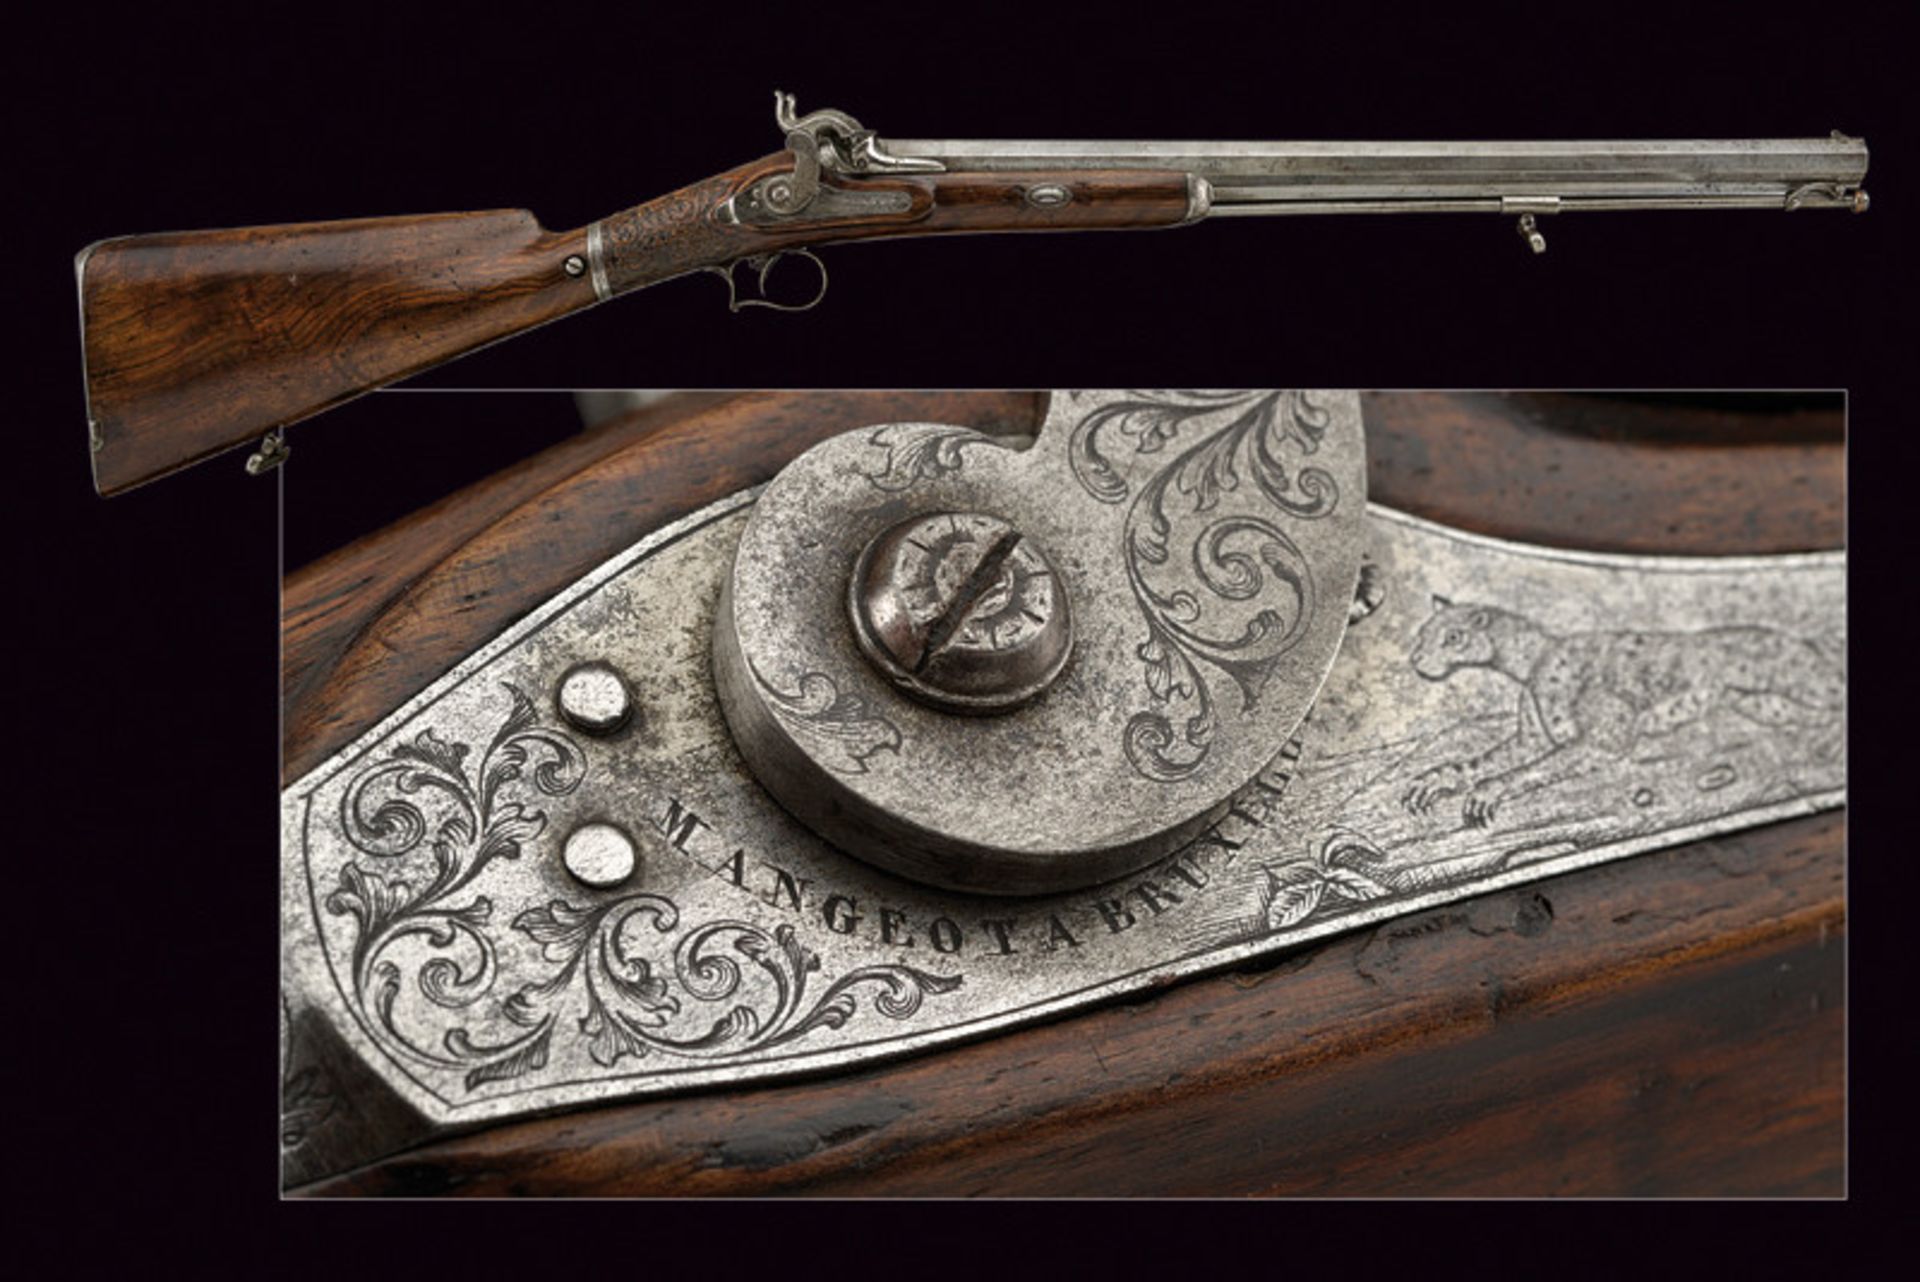 A very scarce superimposed percussion folding rifle by Mangeot at Bruxelles dating: mid-19th Century